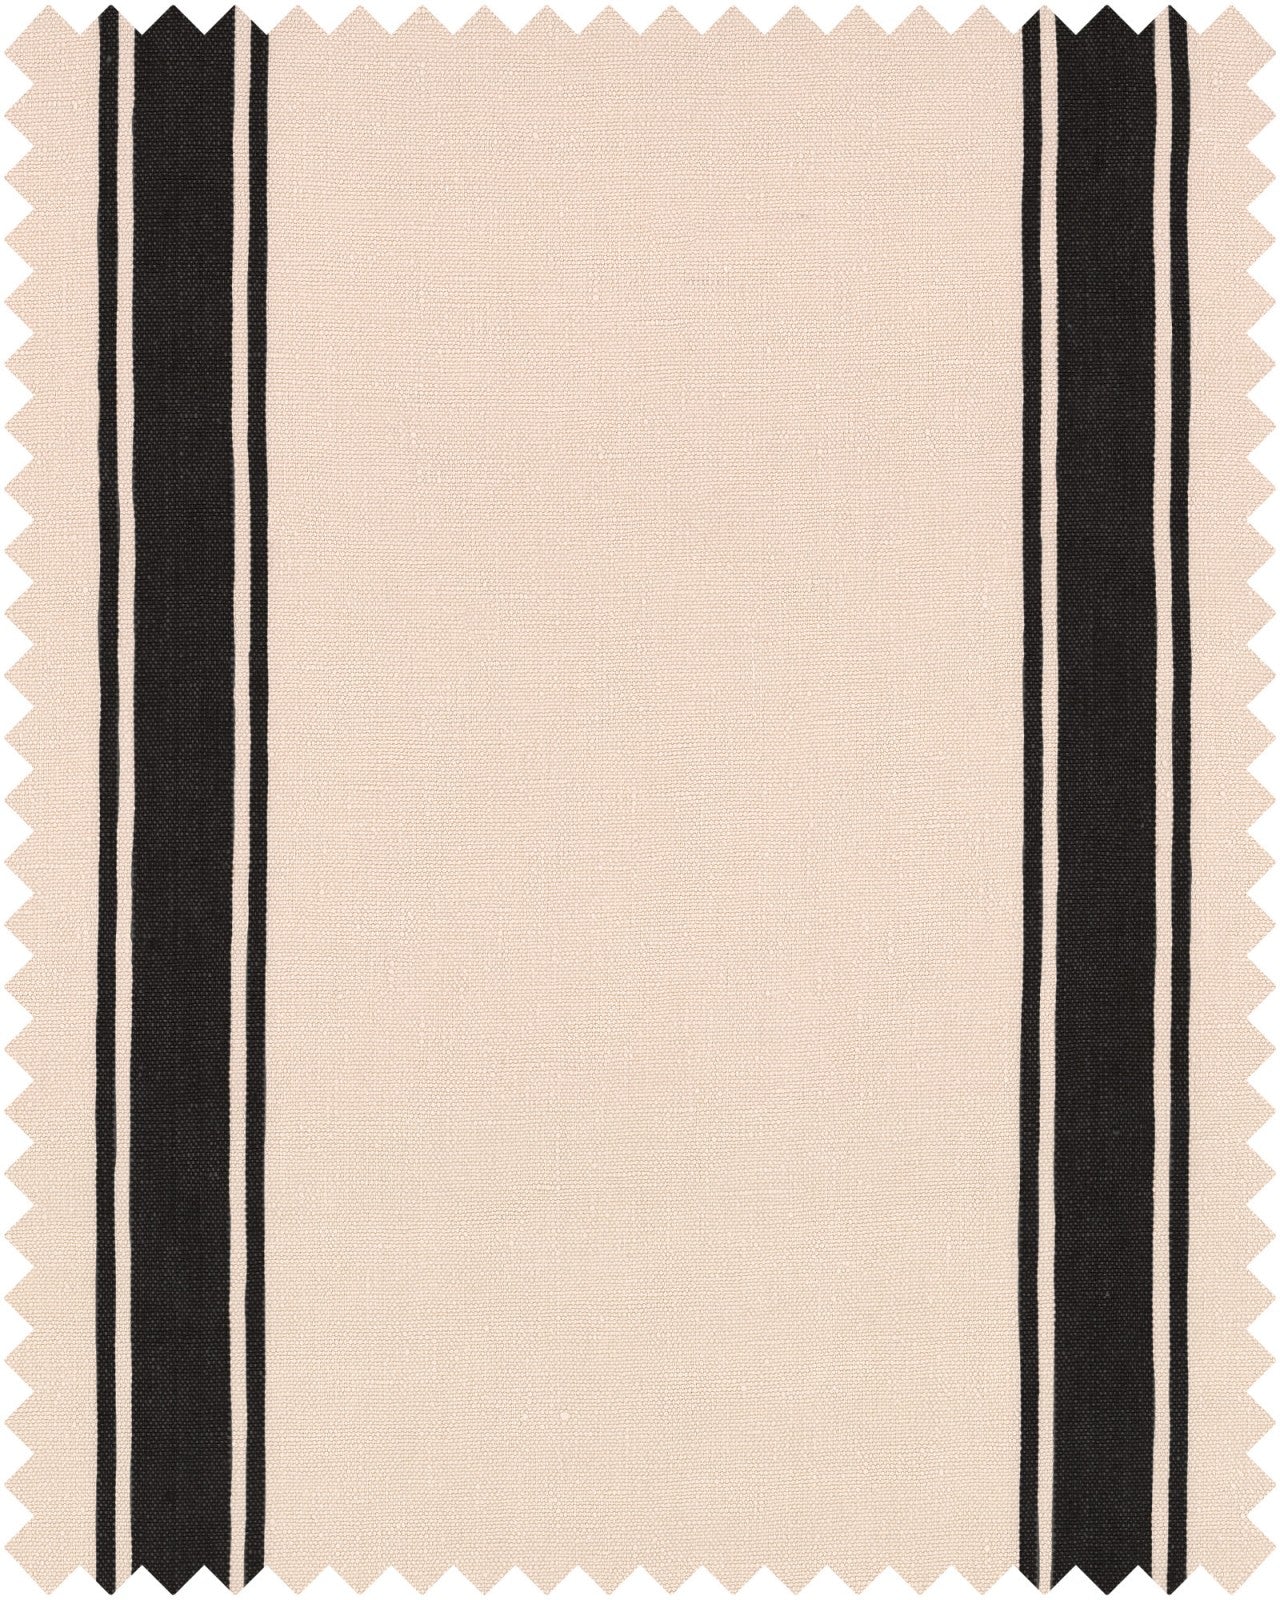 Hajdu Stripe fabric in heavy linen color - pattern number FB00057 - by Mind The Gap in the Transylvanian Roots collection